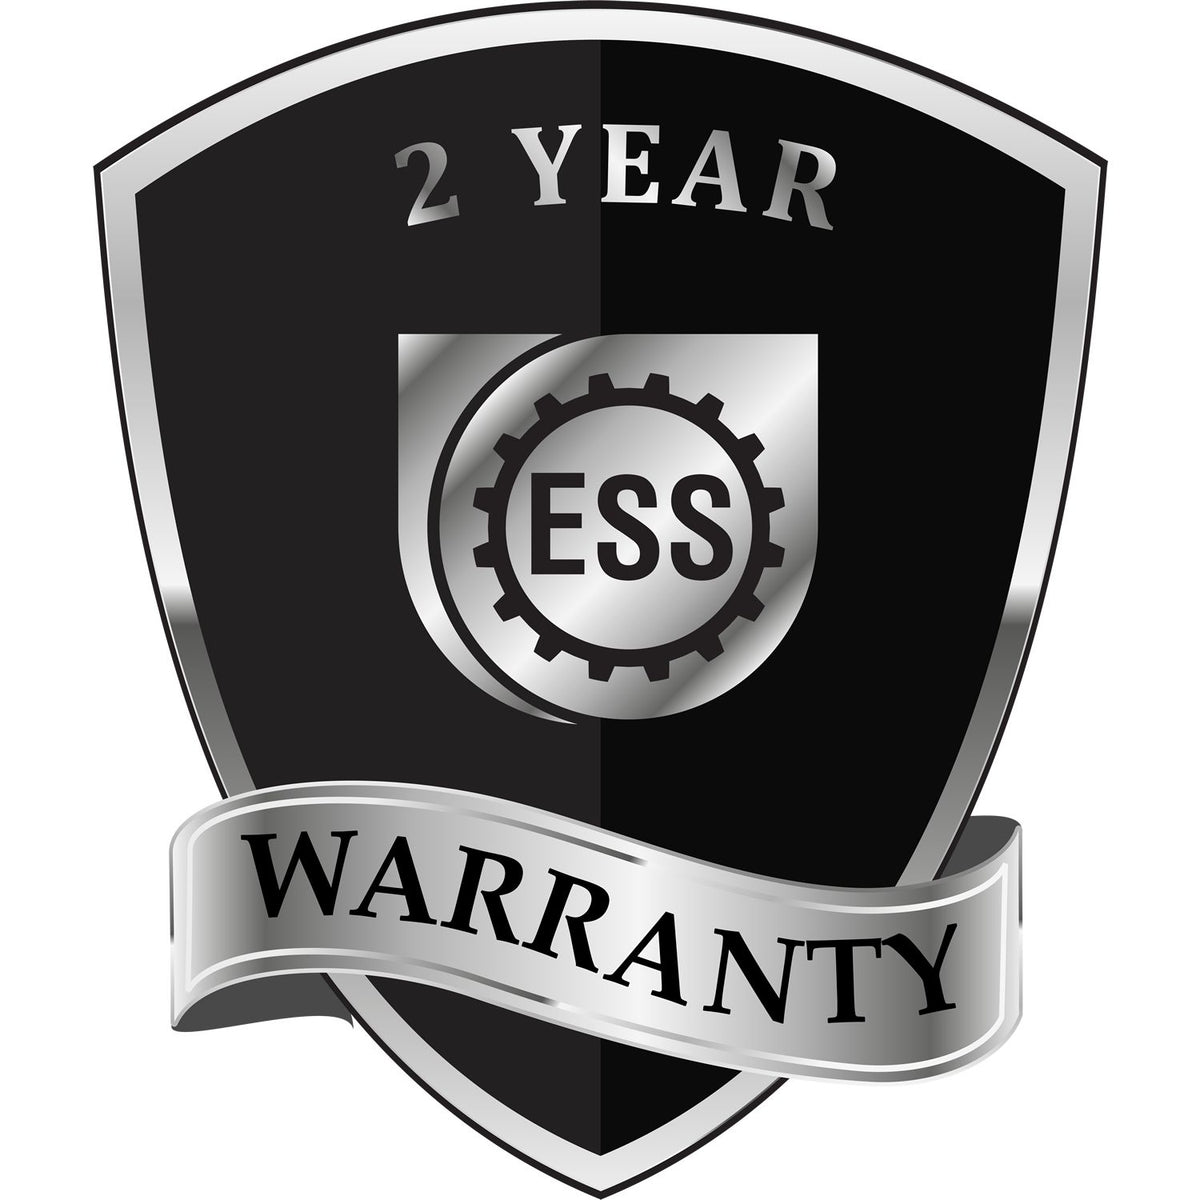 A black and silver badge or emblem showing warranty information for the State of Pennsylvania Extended Long Reach Geologist Seal